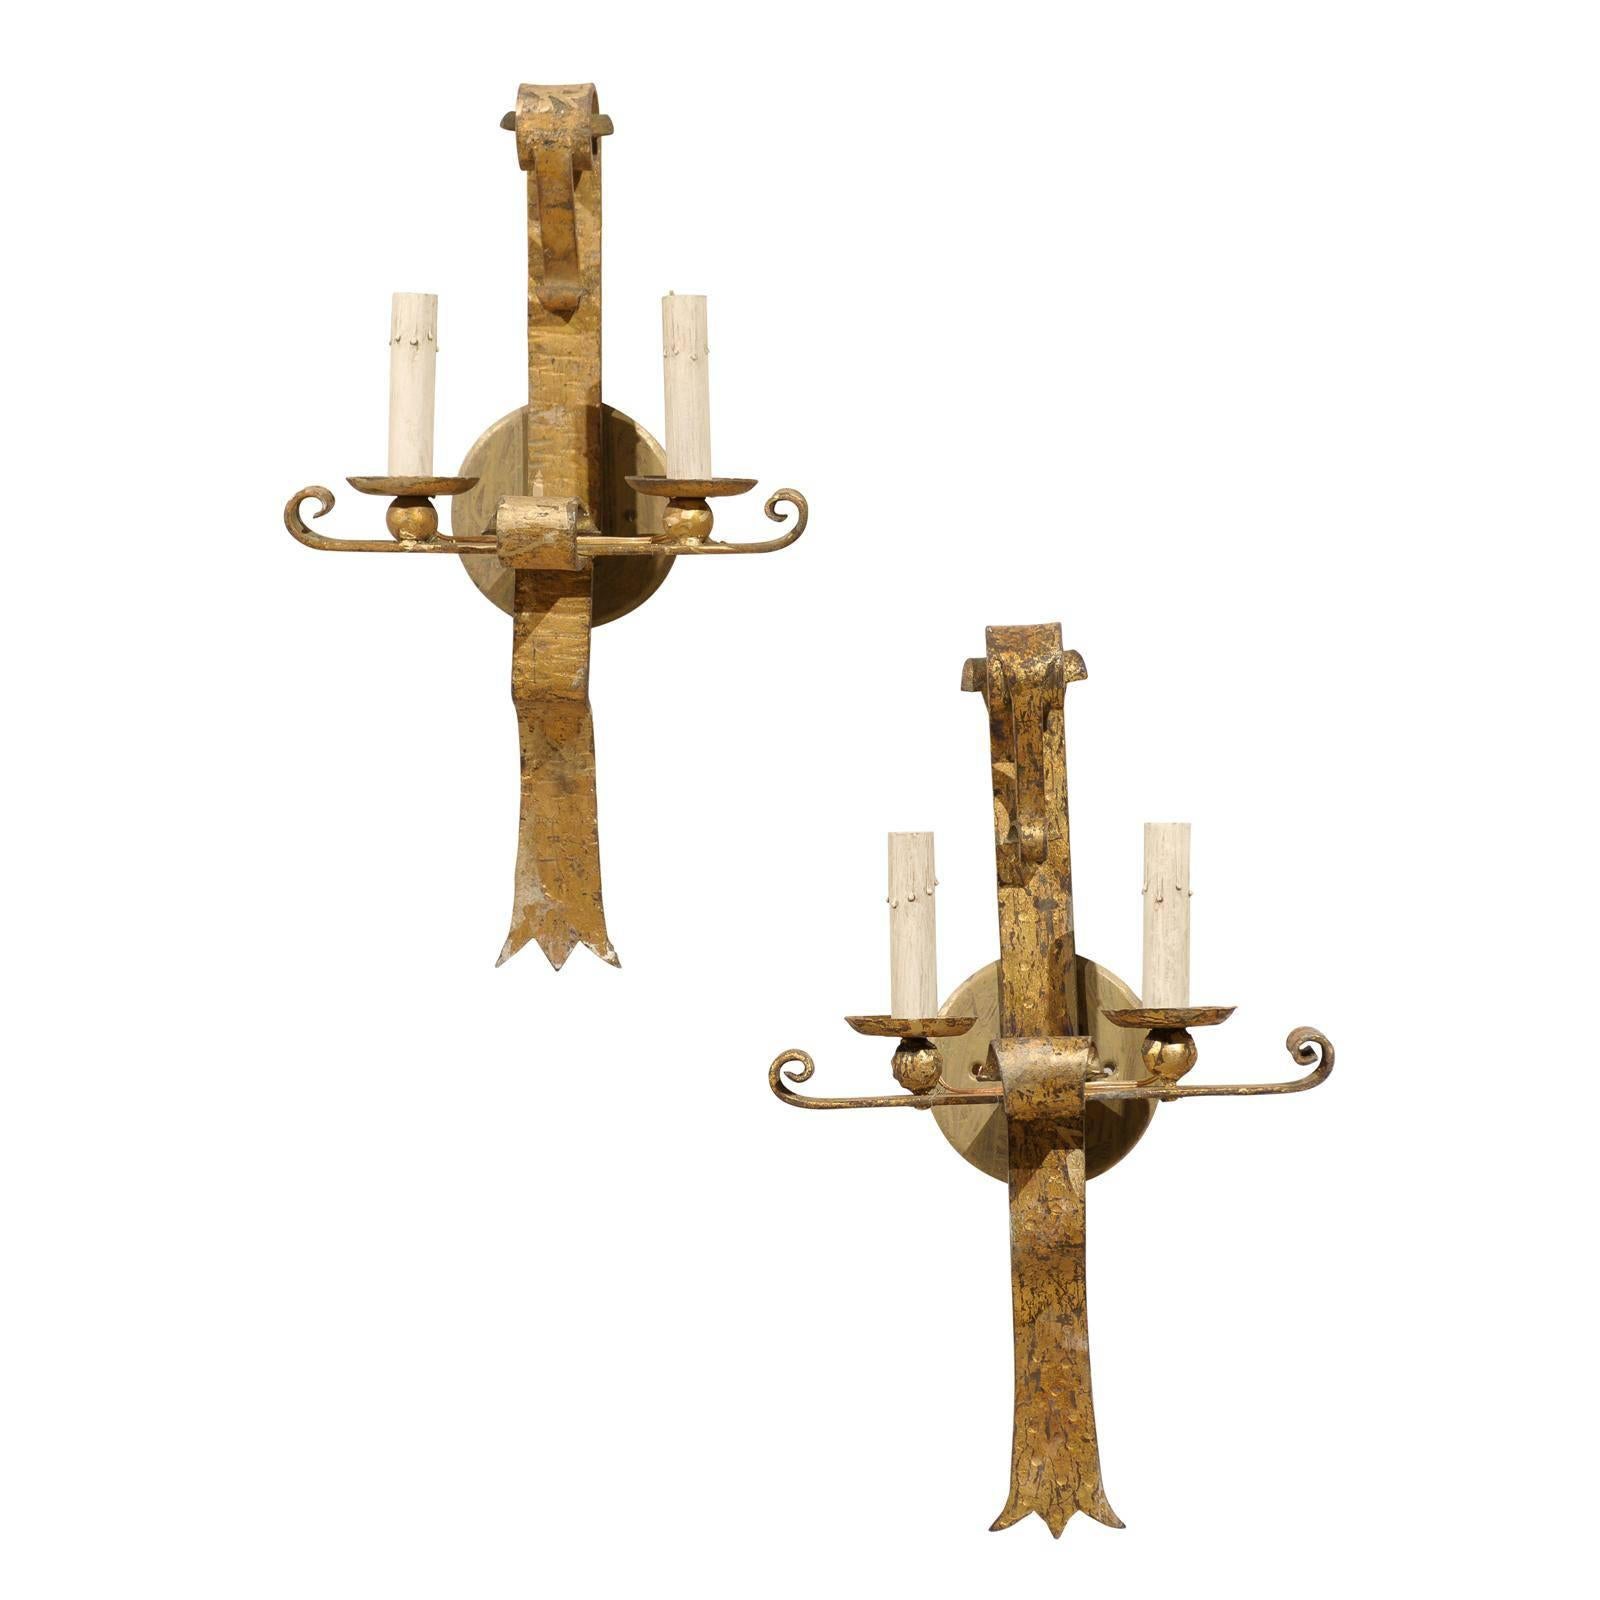 Pair of French Gilt Metal Two-Light Sconces with Volutes at the Top and Scrolls